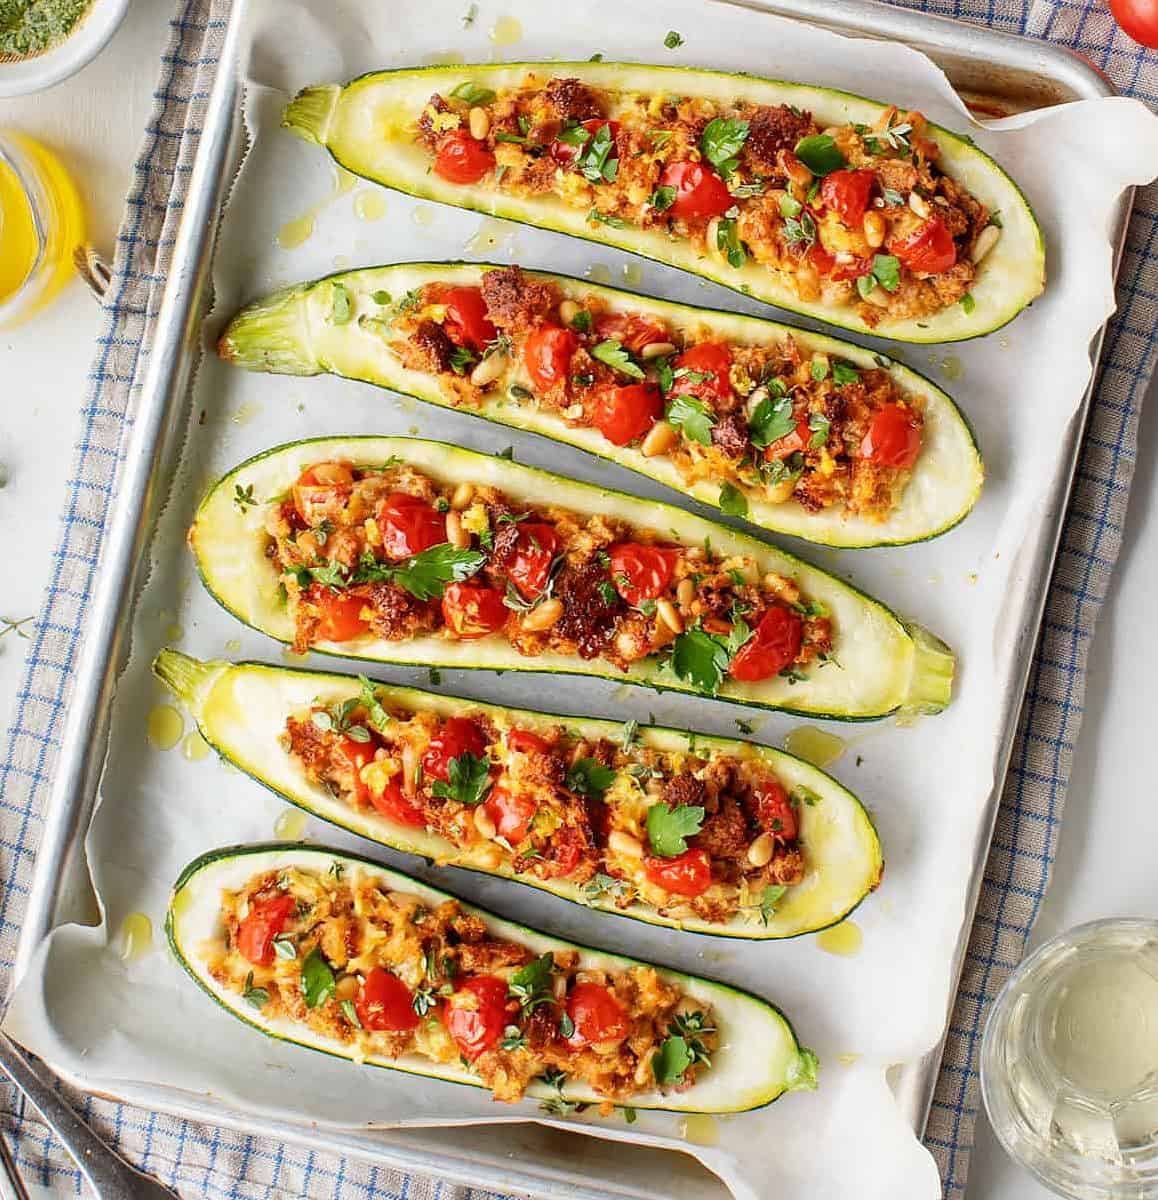  Beautifully roasted zucchini boats filled with a flavorful veggie stuffing